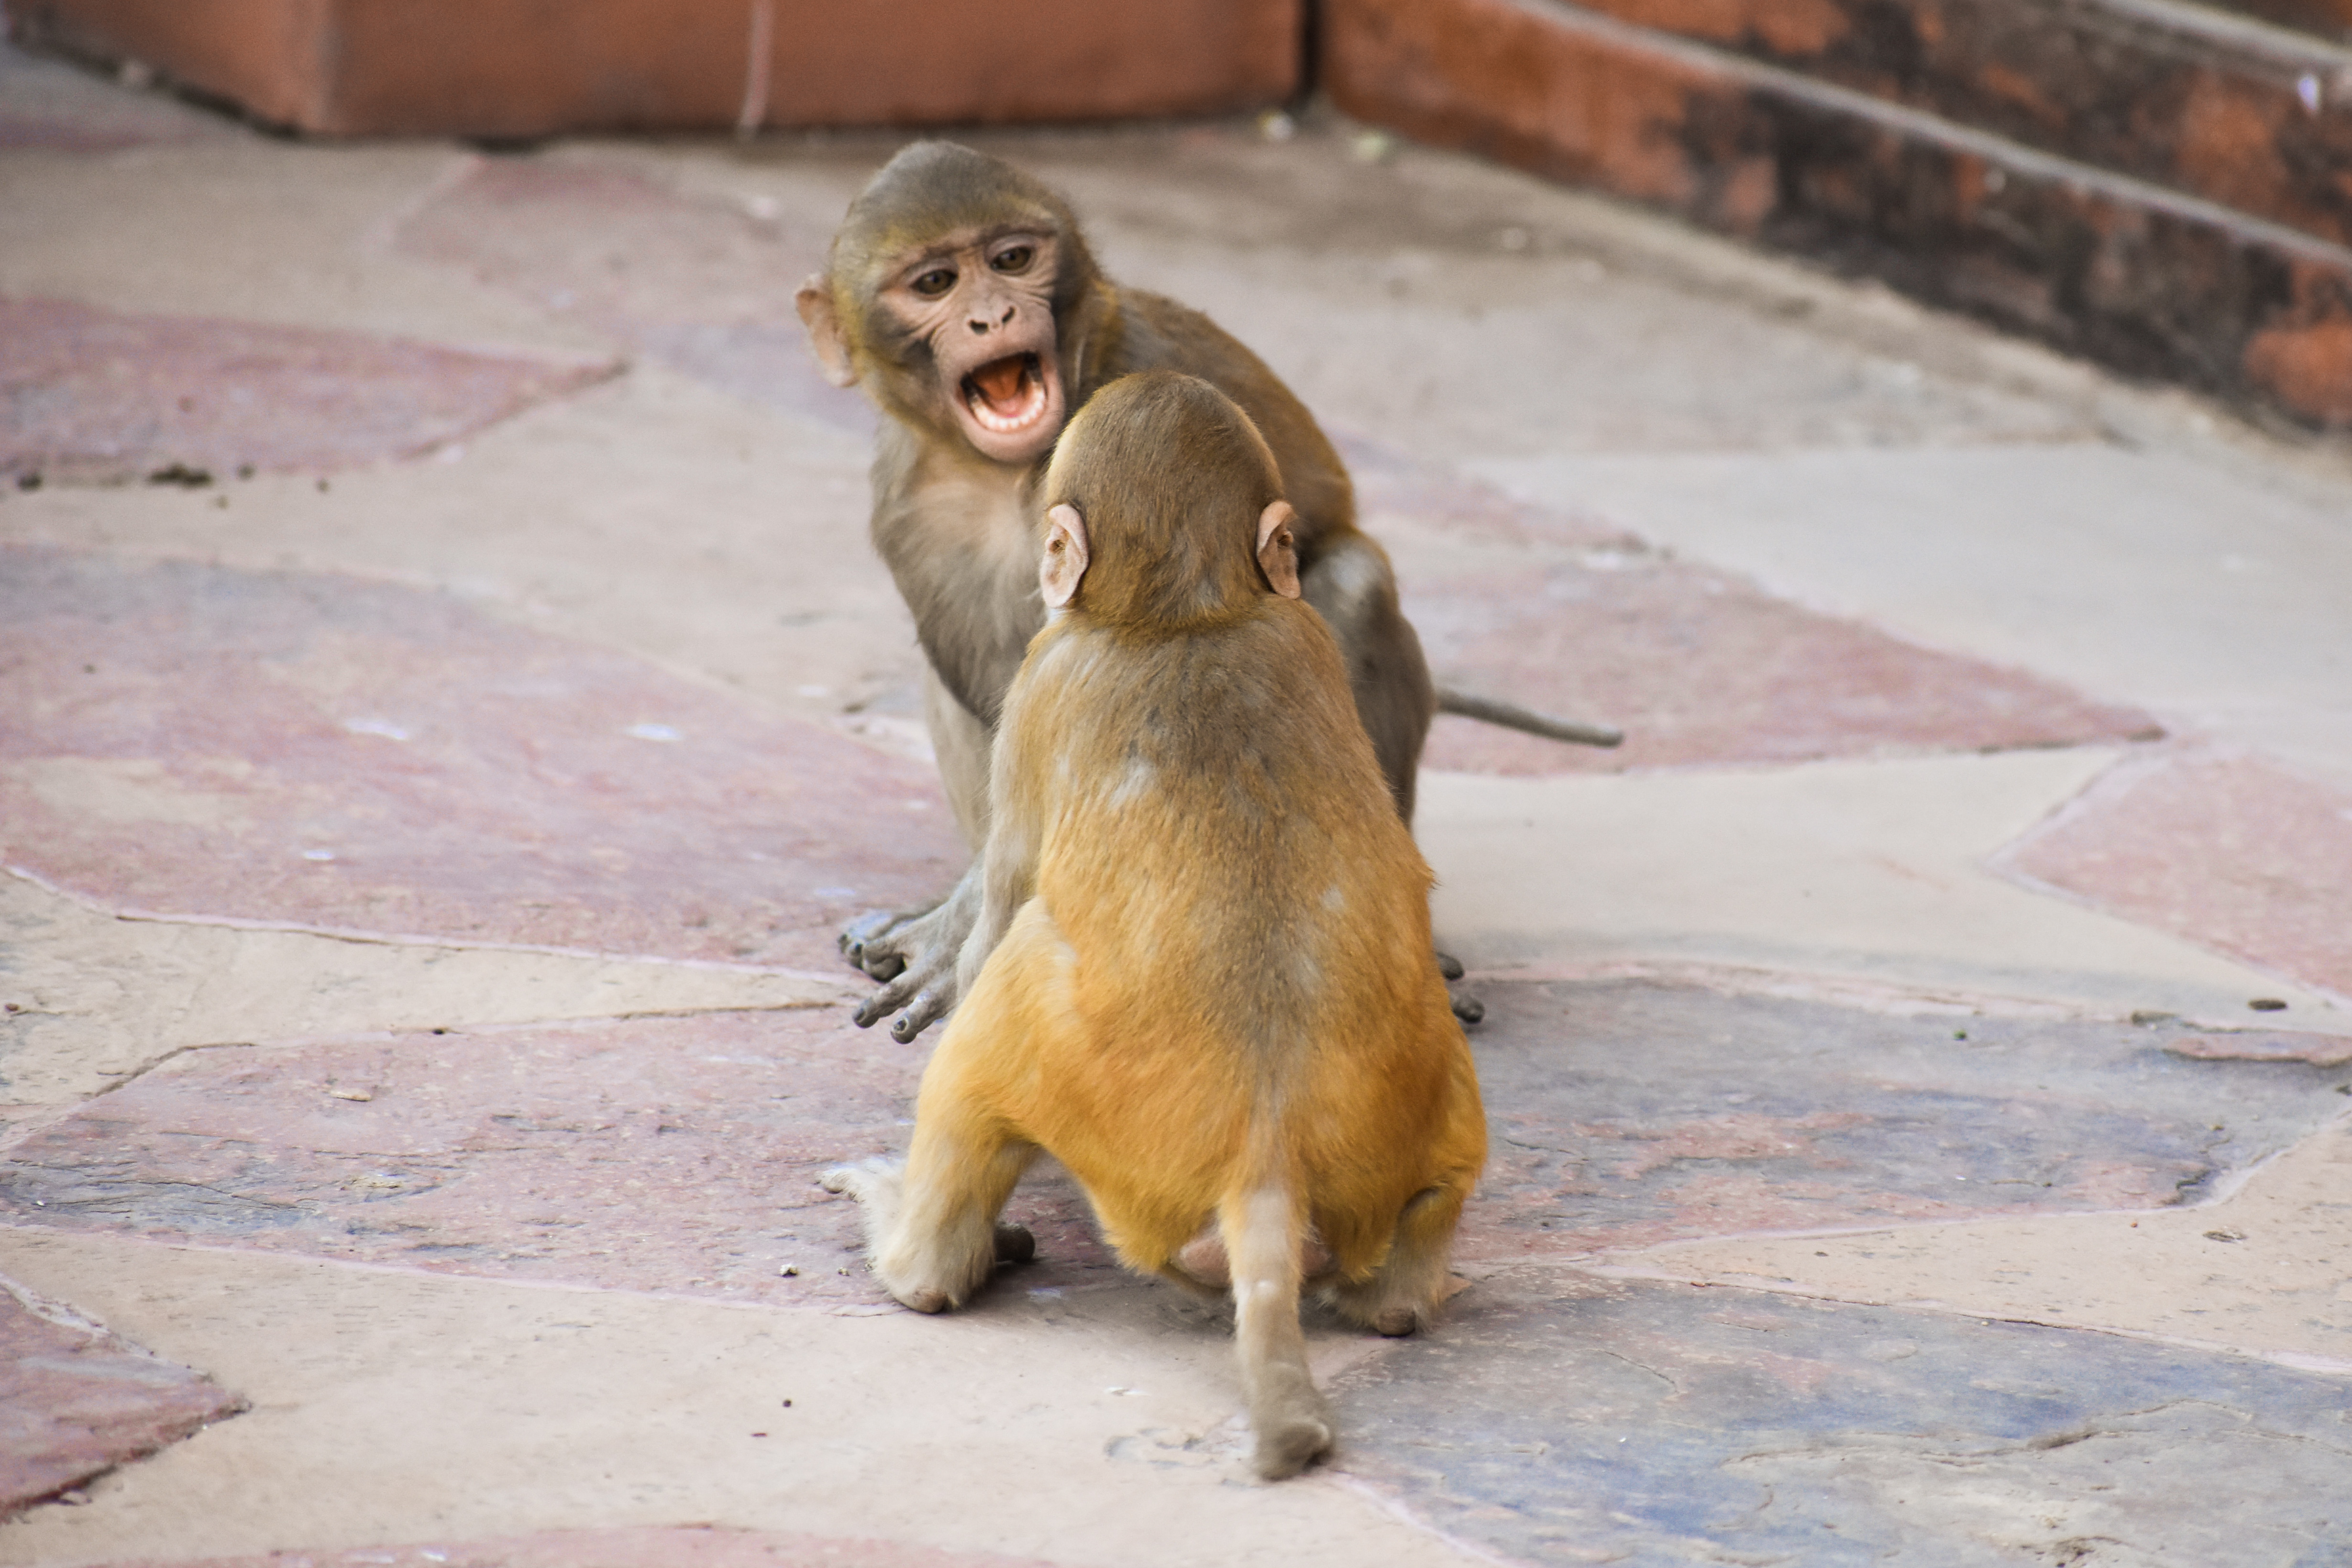 Cute Monkeys Play fight royalty free stock image